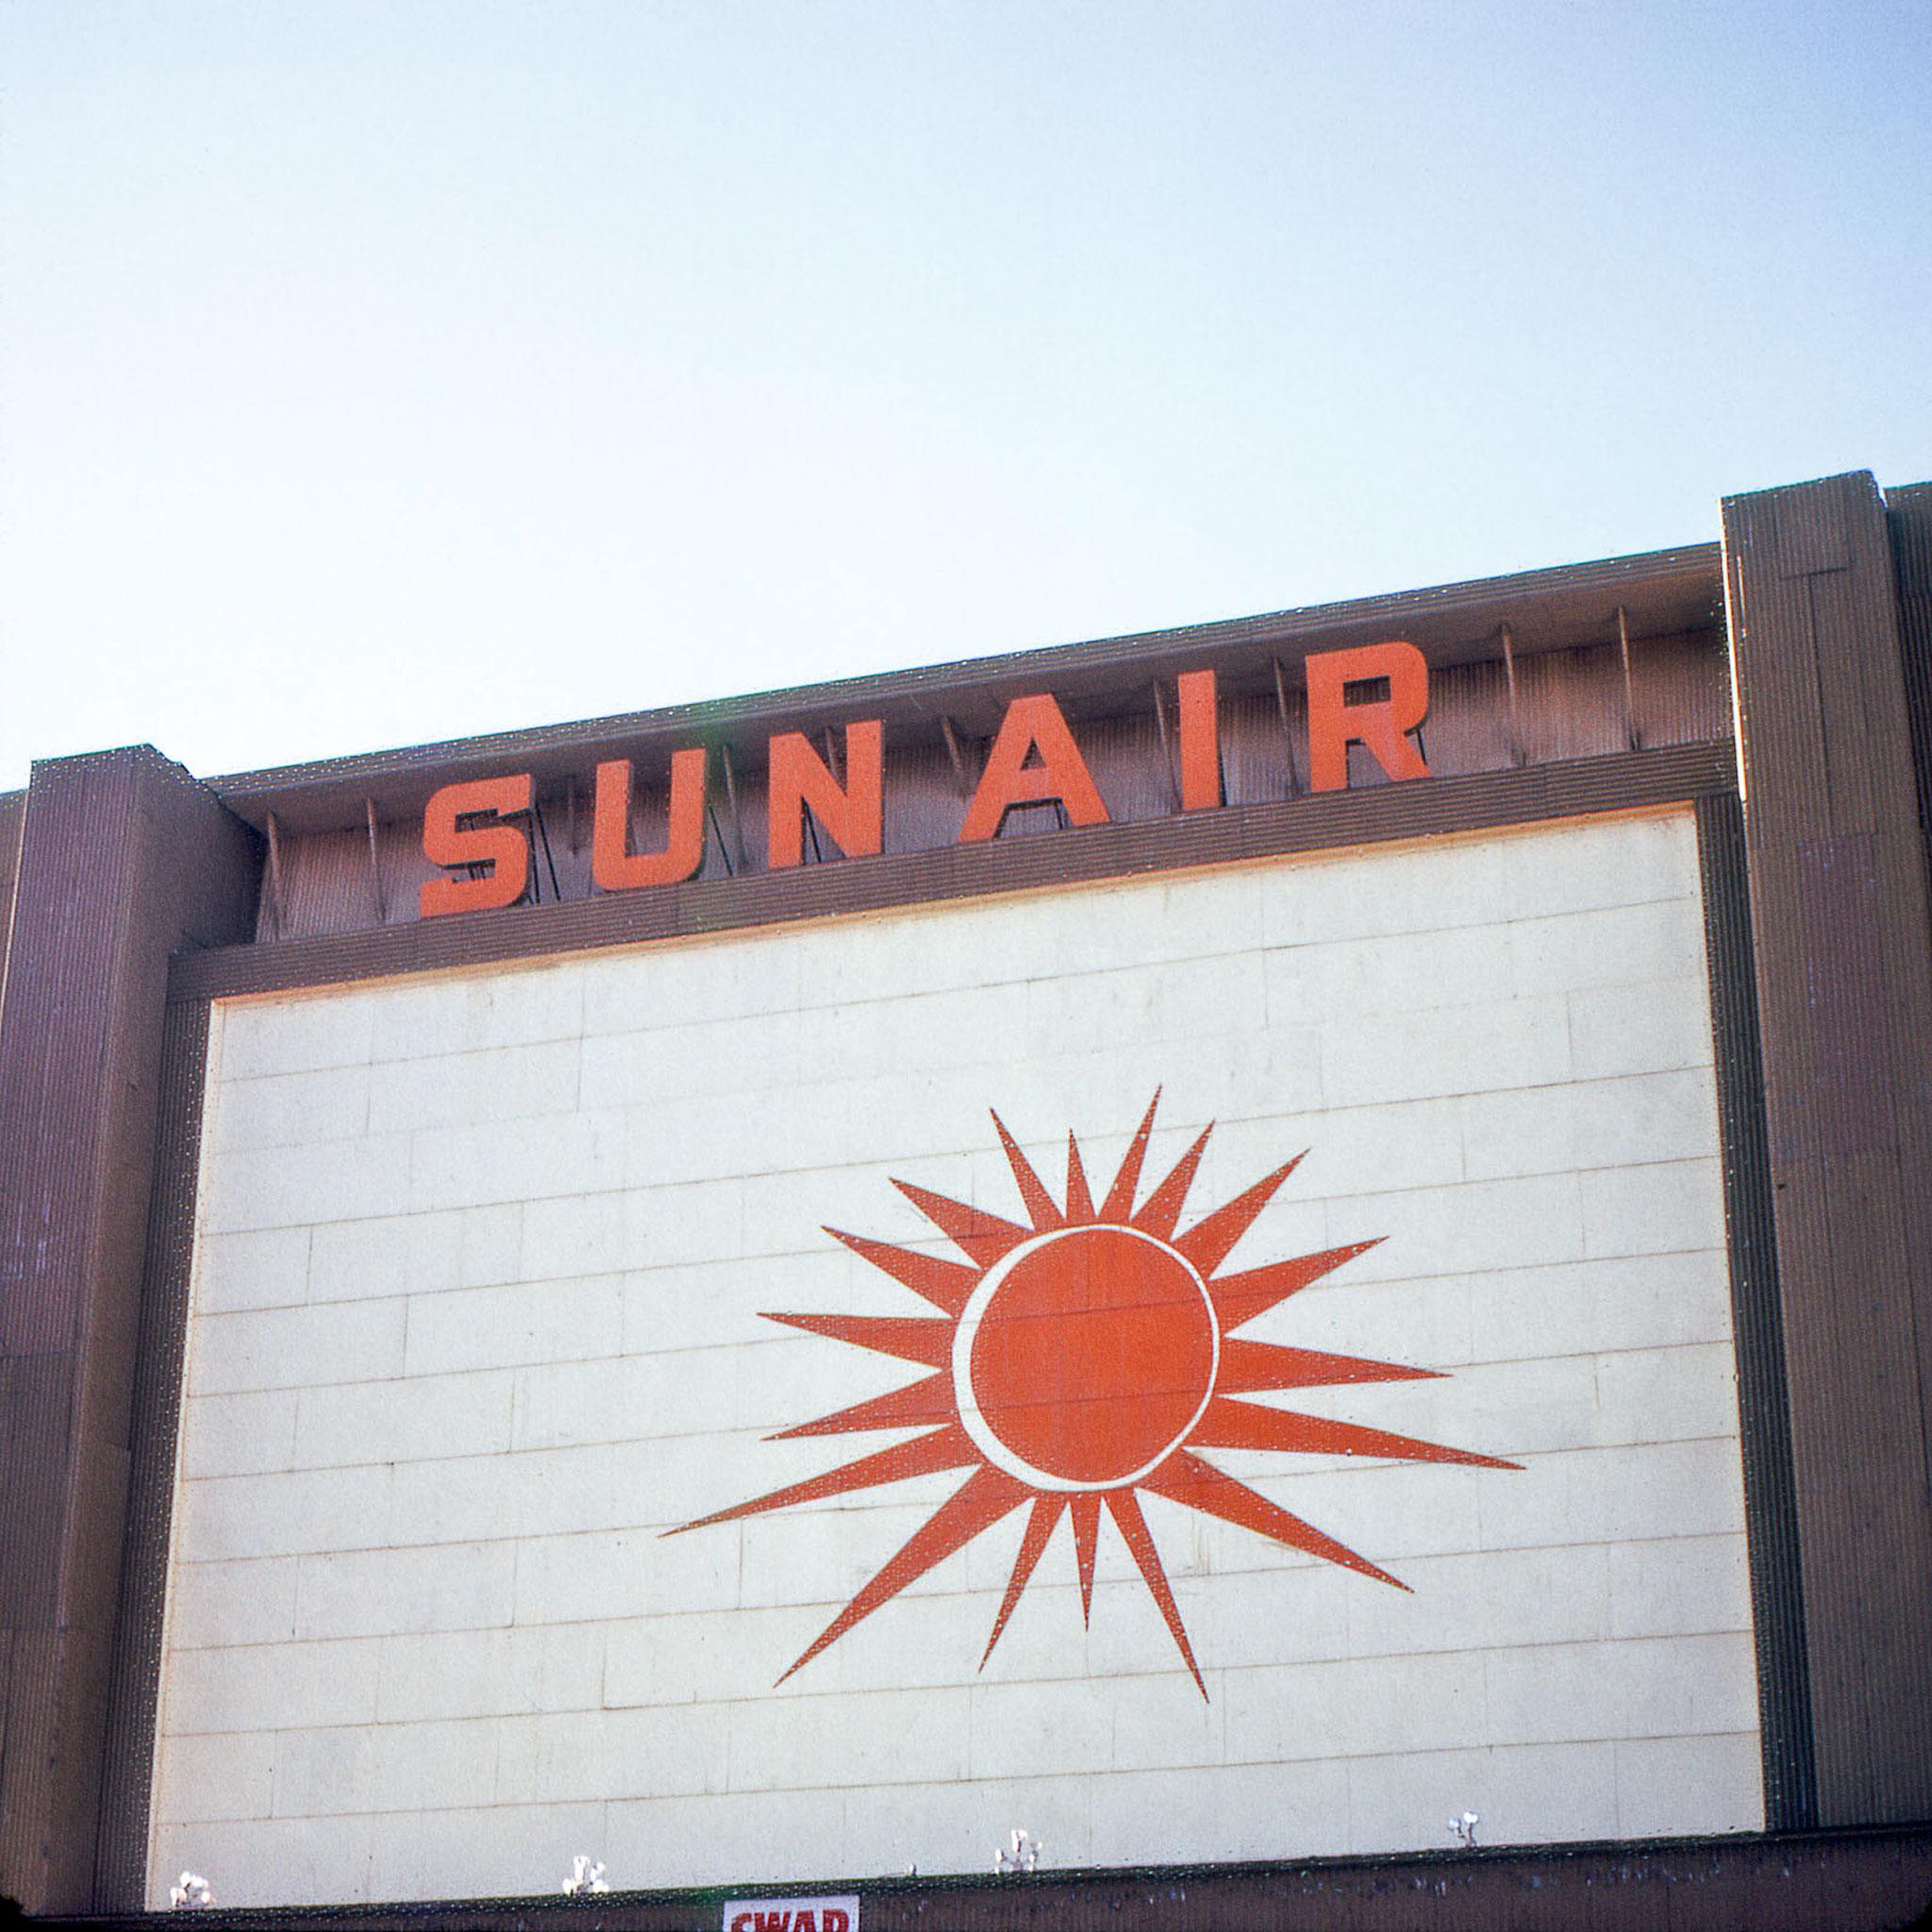 A sign that says "SunAir" and has a red sun graphic